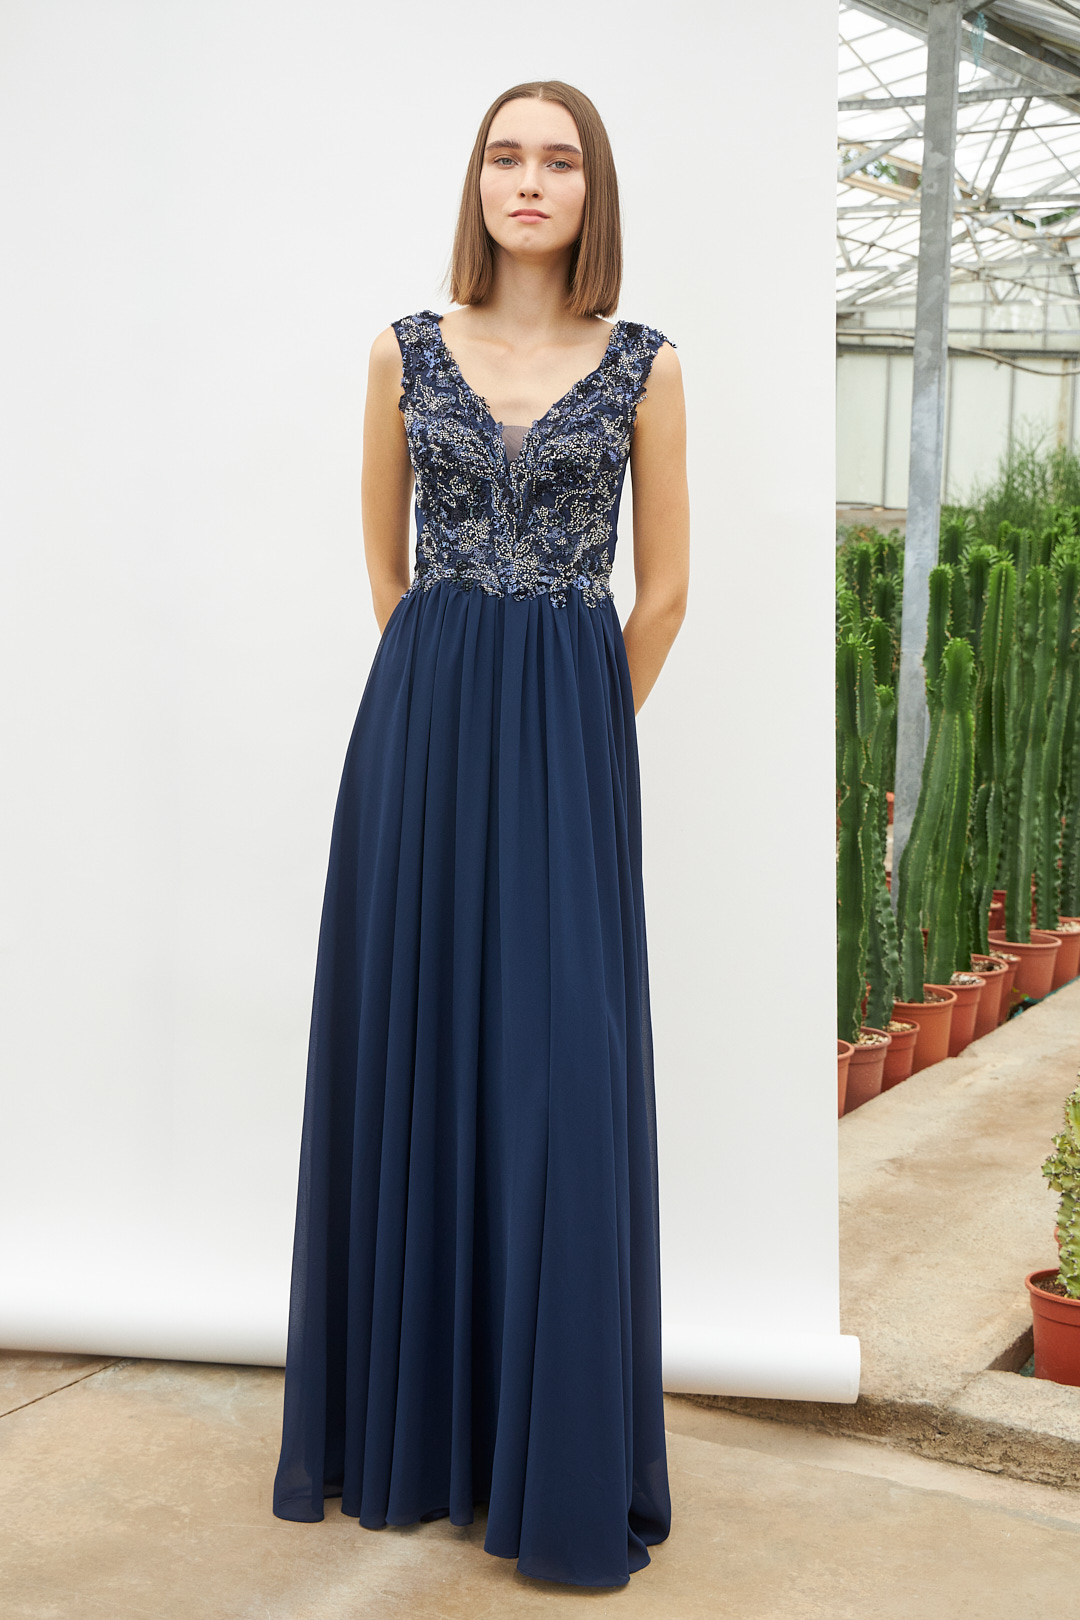 Классические платья / Long classic dresss with fuly beaded top and wide straps